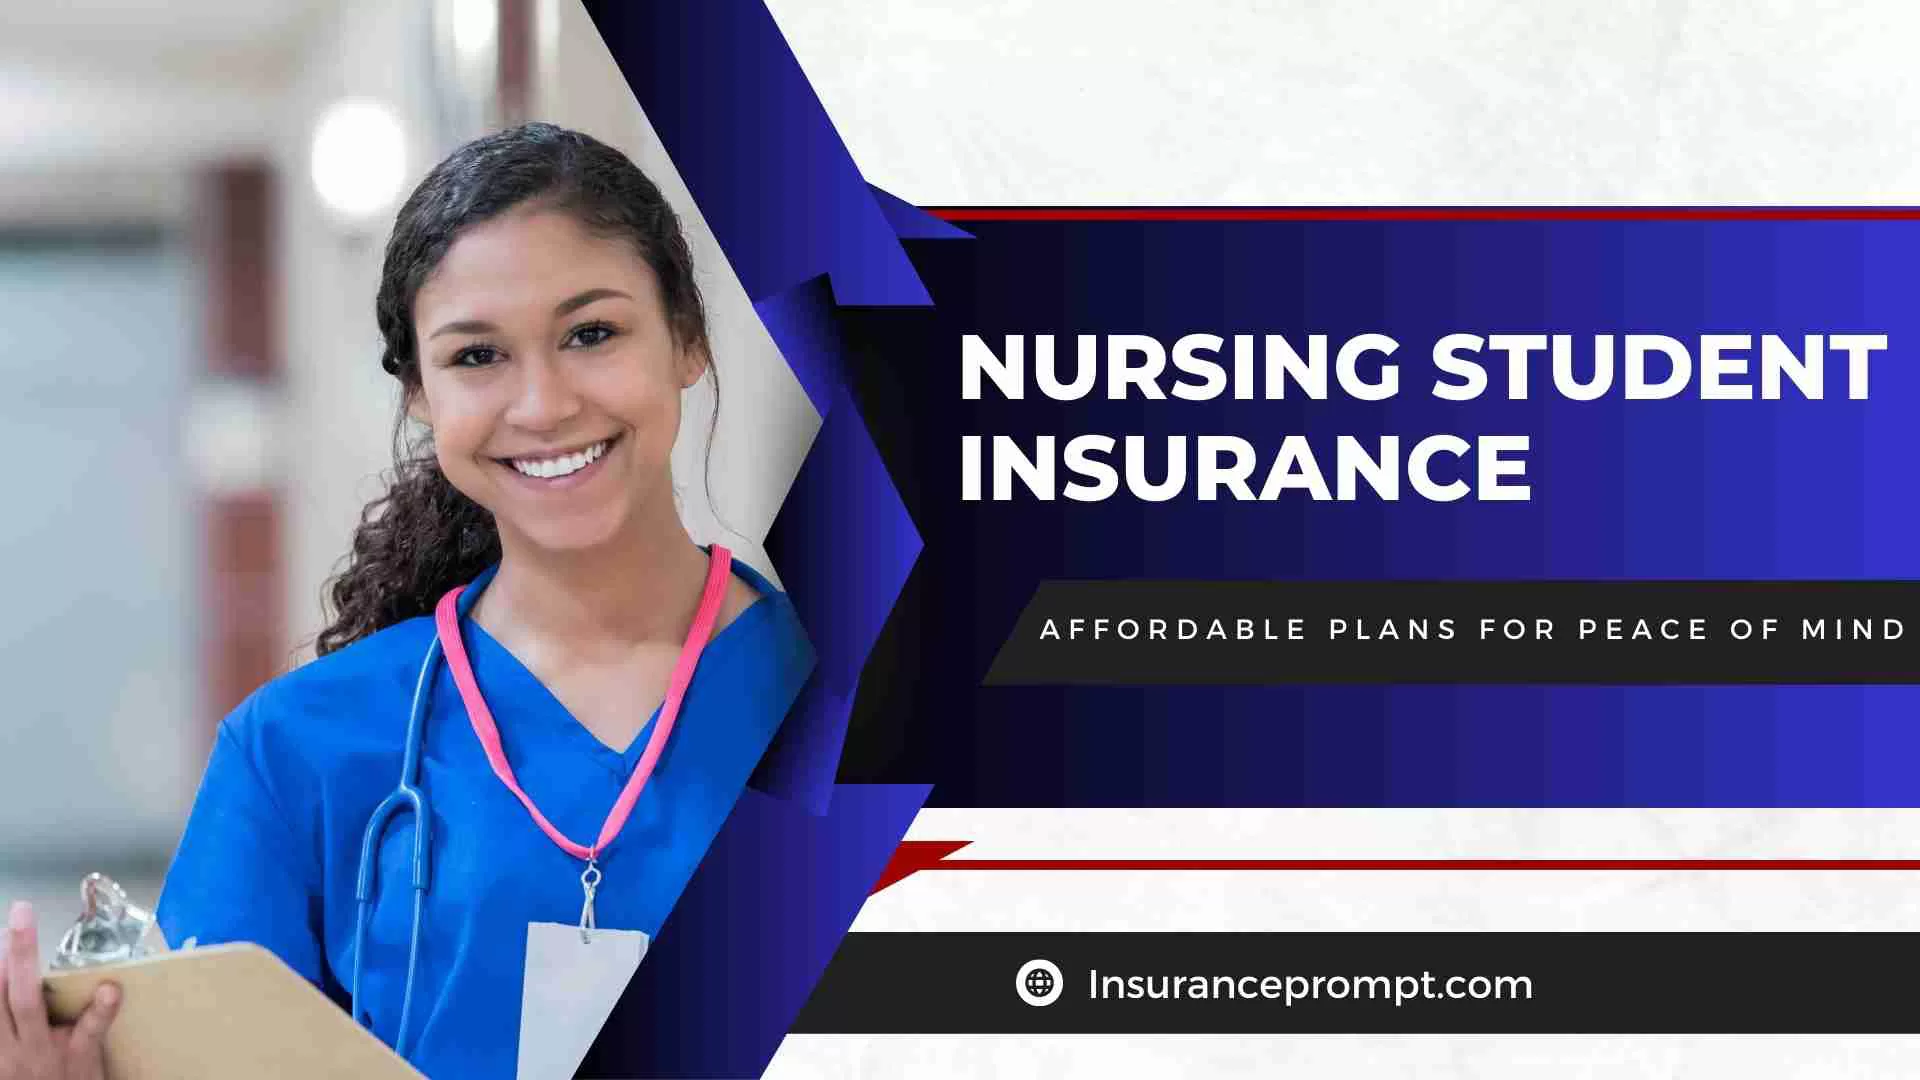 Nursing Student Insurance: Affordable Plans for Peace of Mind